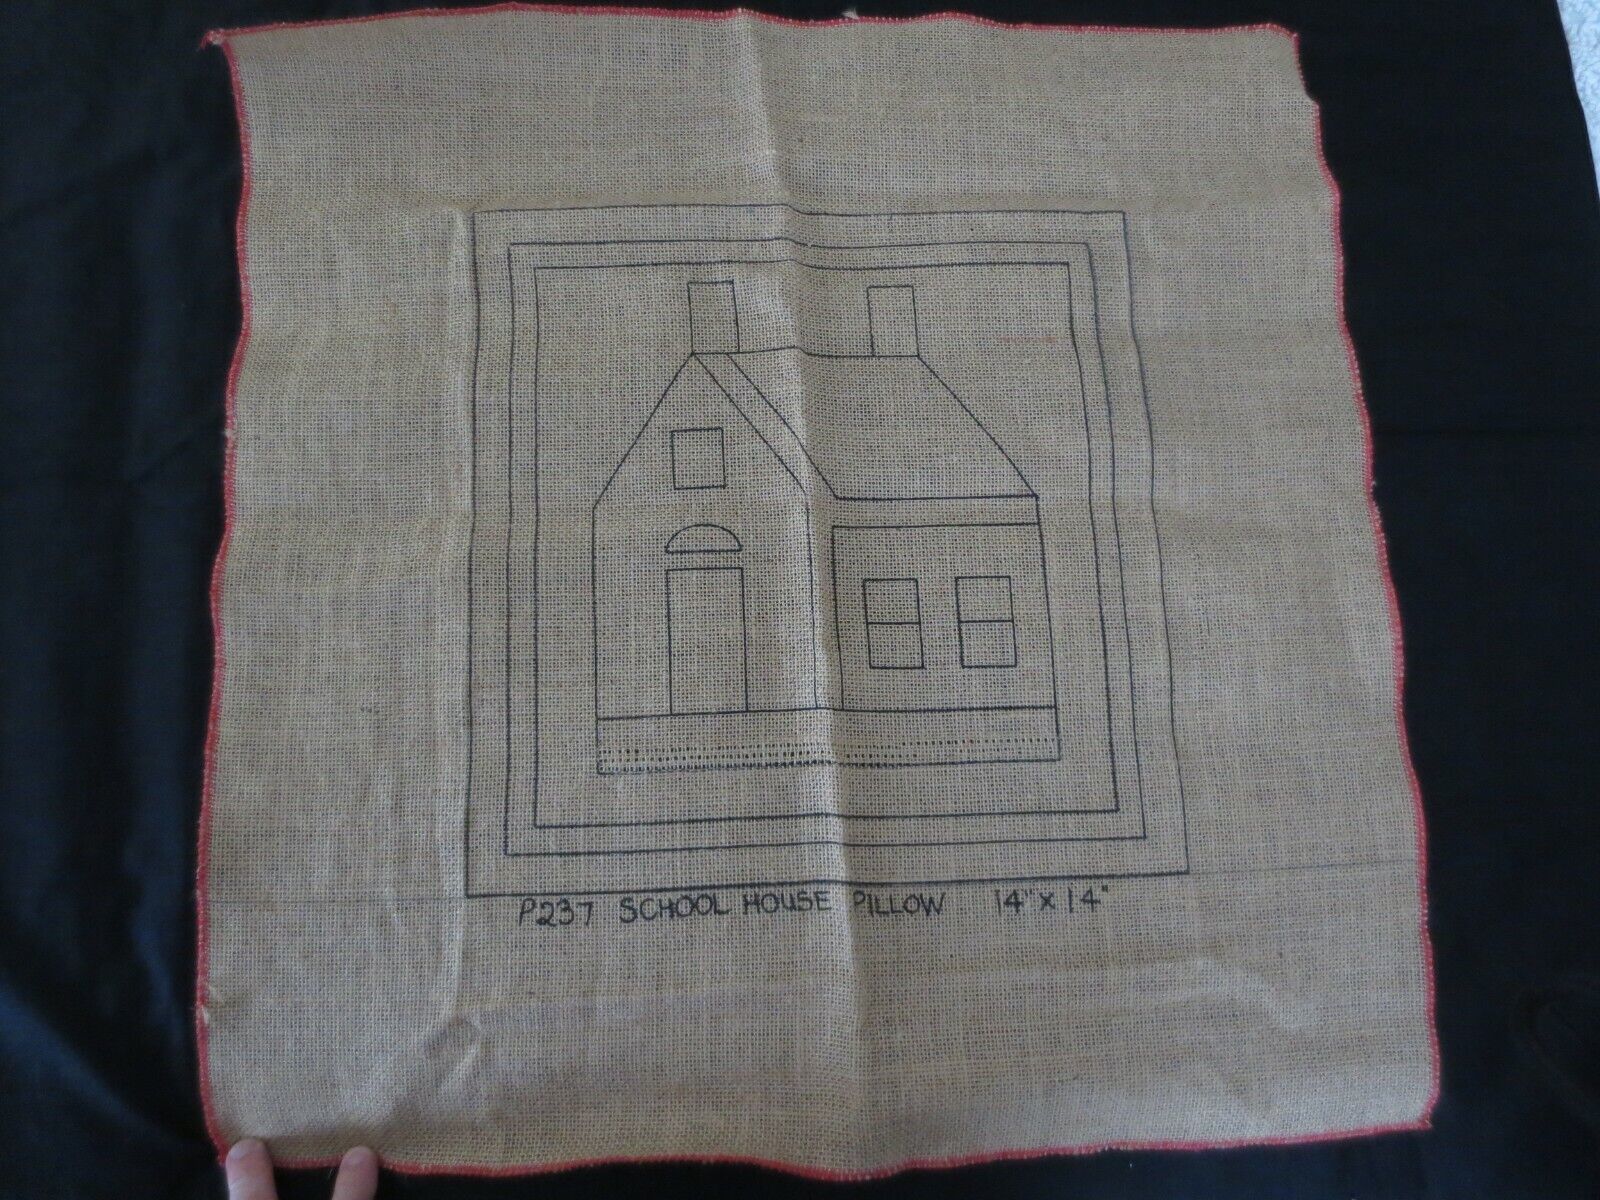 Primary image for P237 SCHOOL HOUSE Pillow CANVAS - 14" x 14"